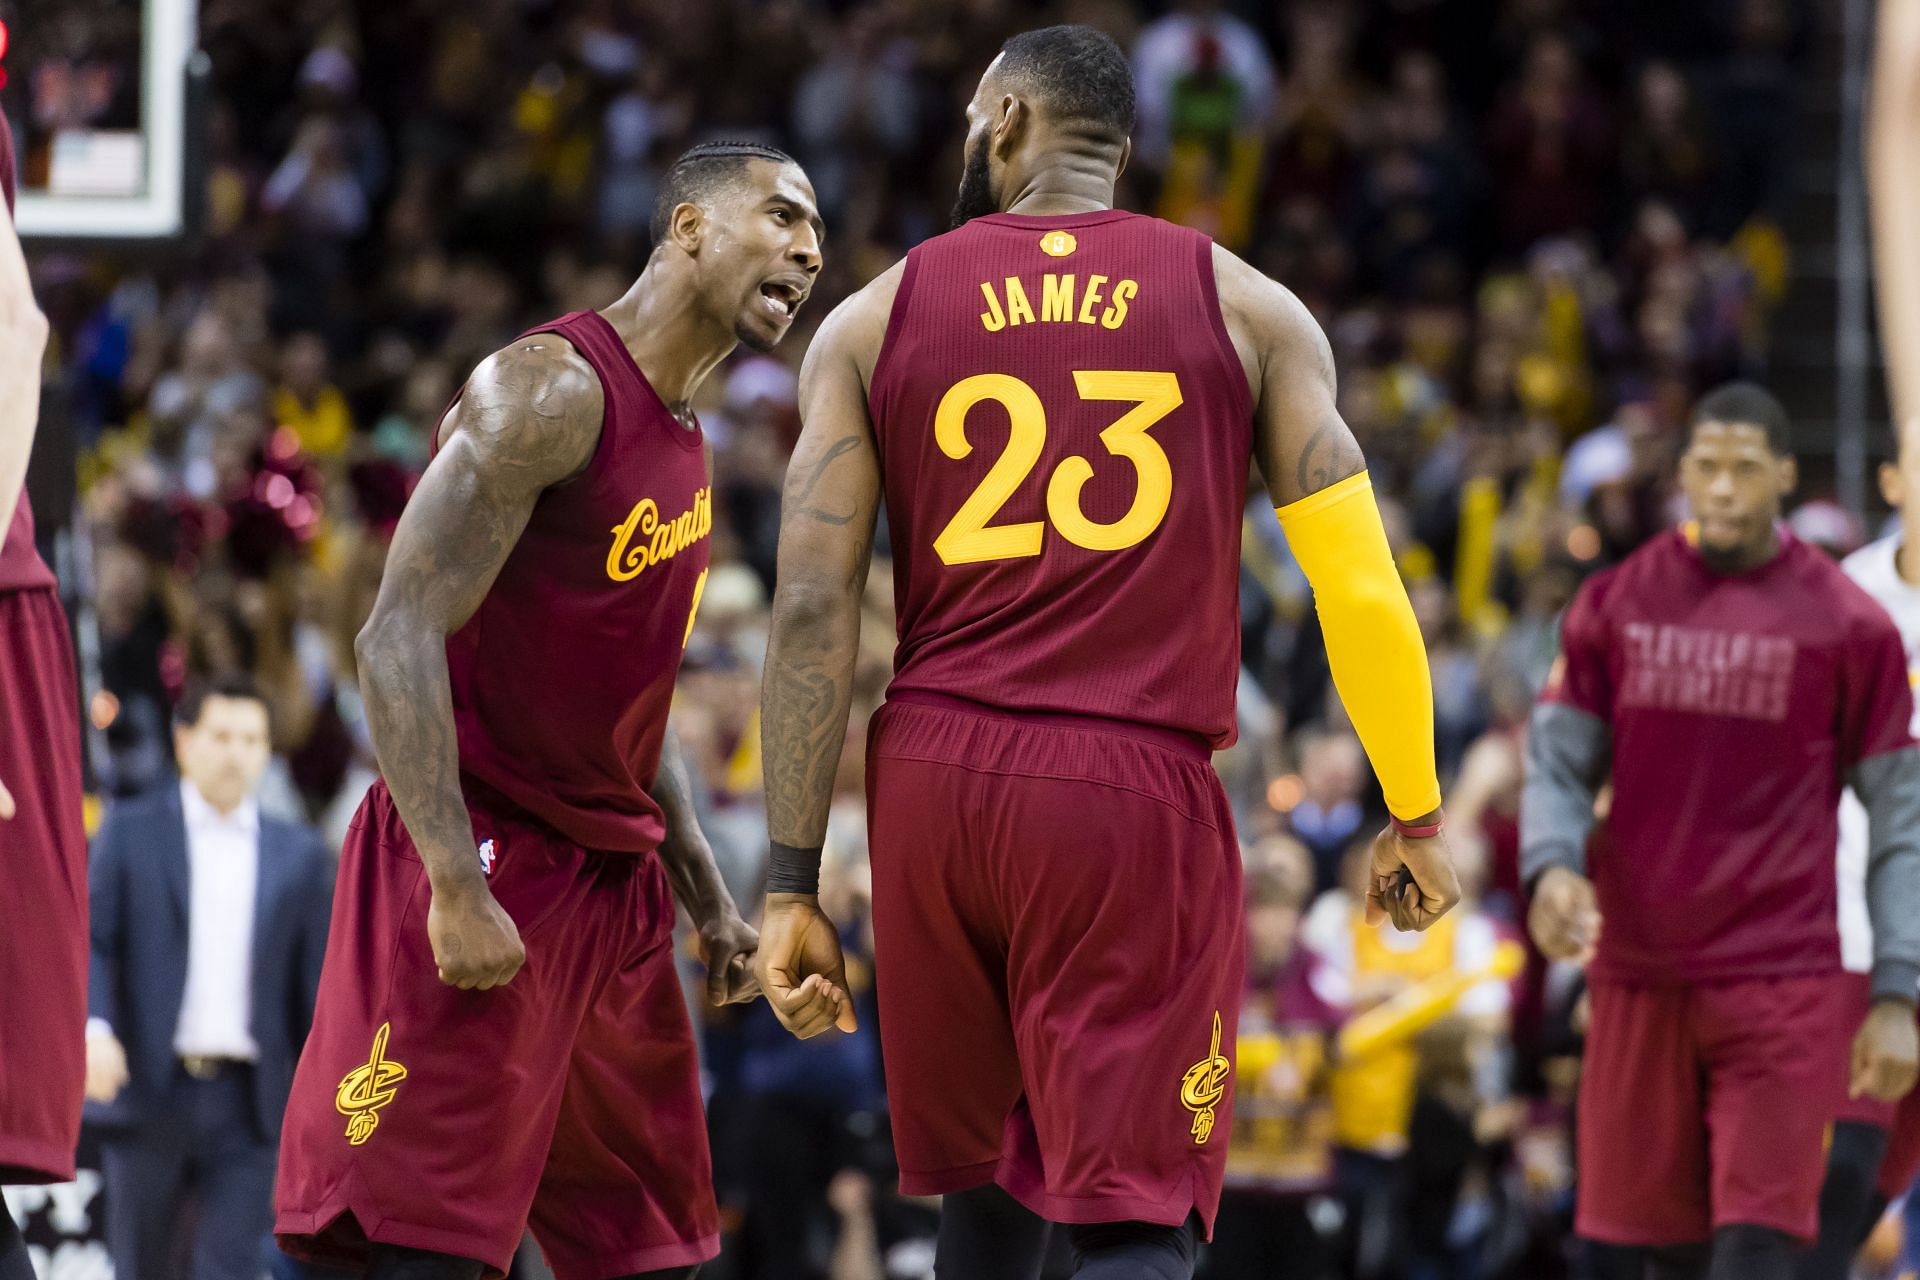 Iman Shumpert and LeBron James were teammates with the Cleveland Cavaliers.